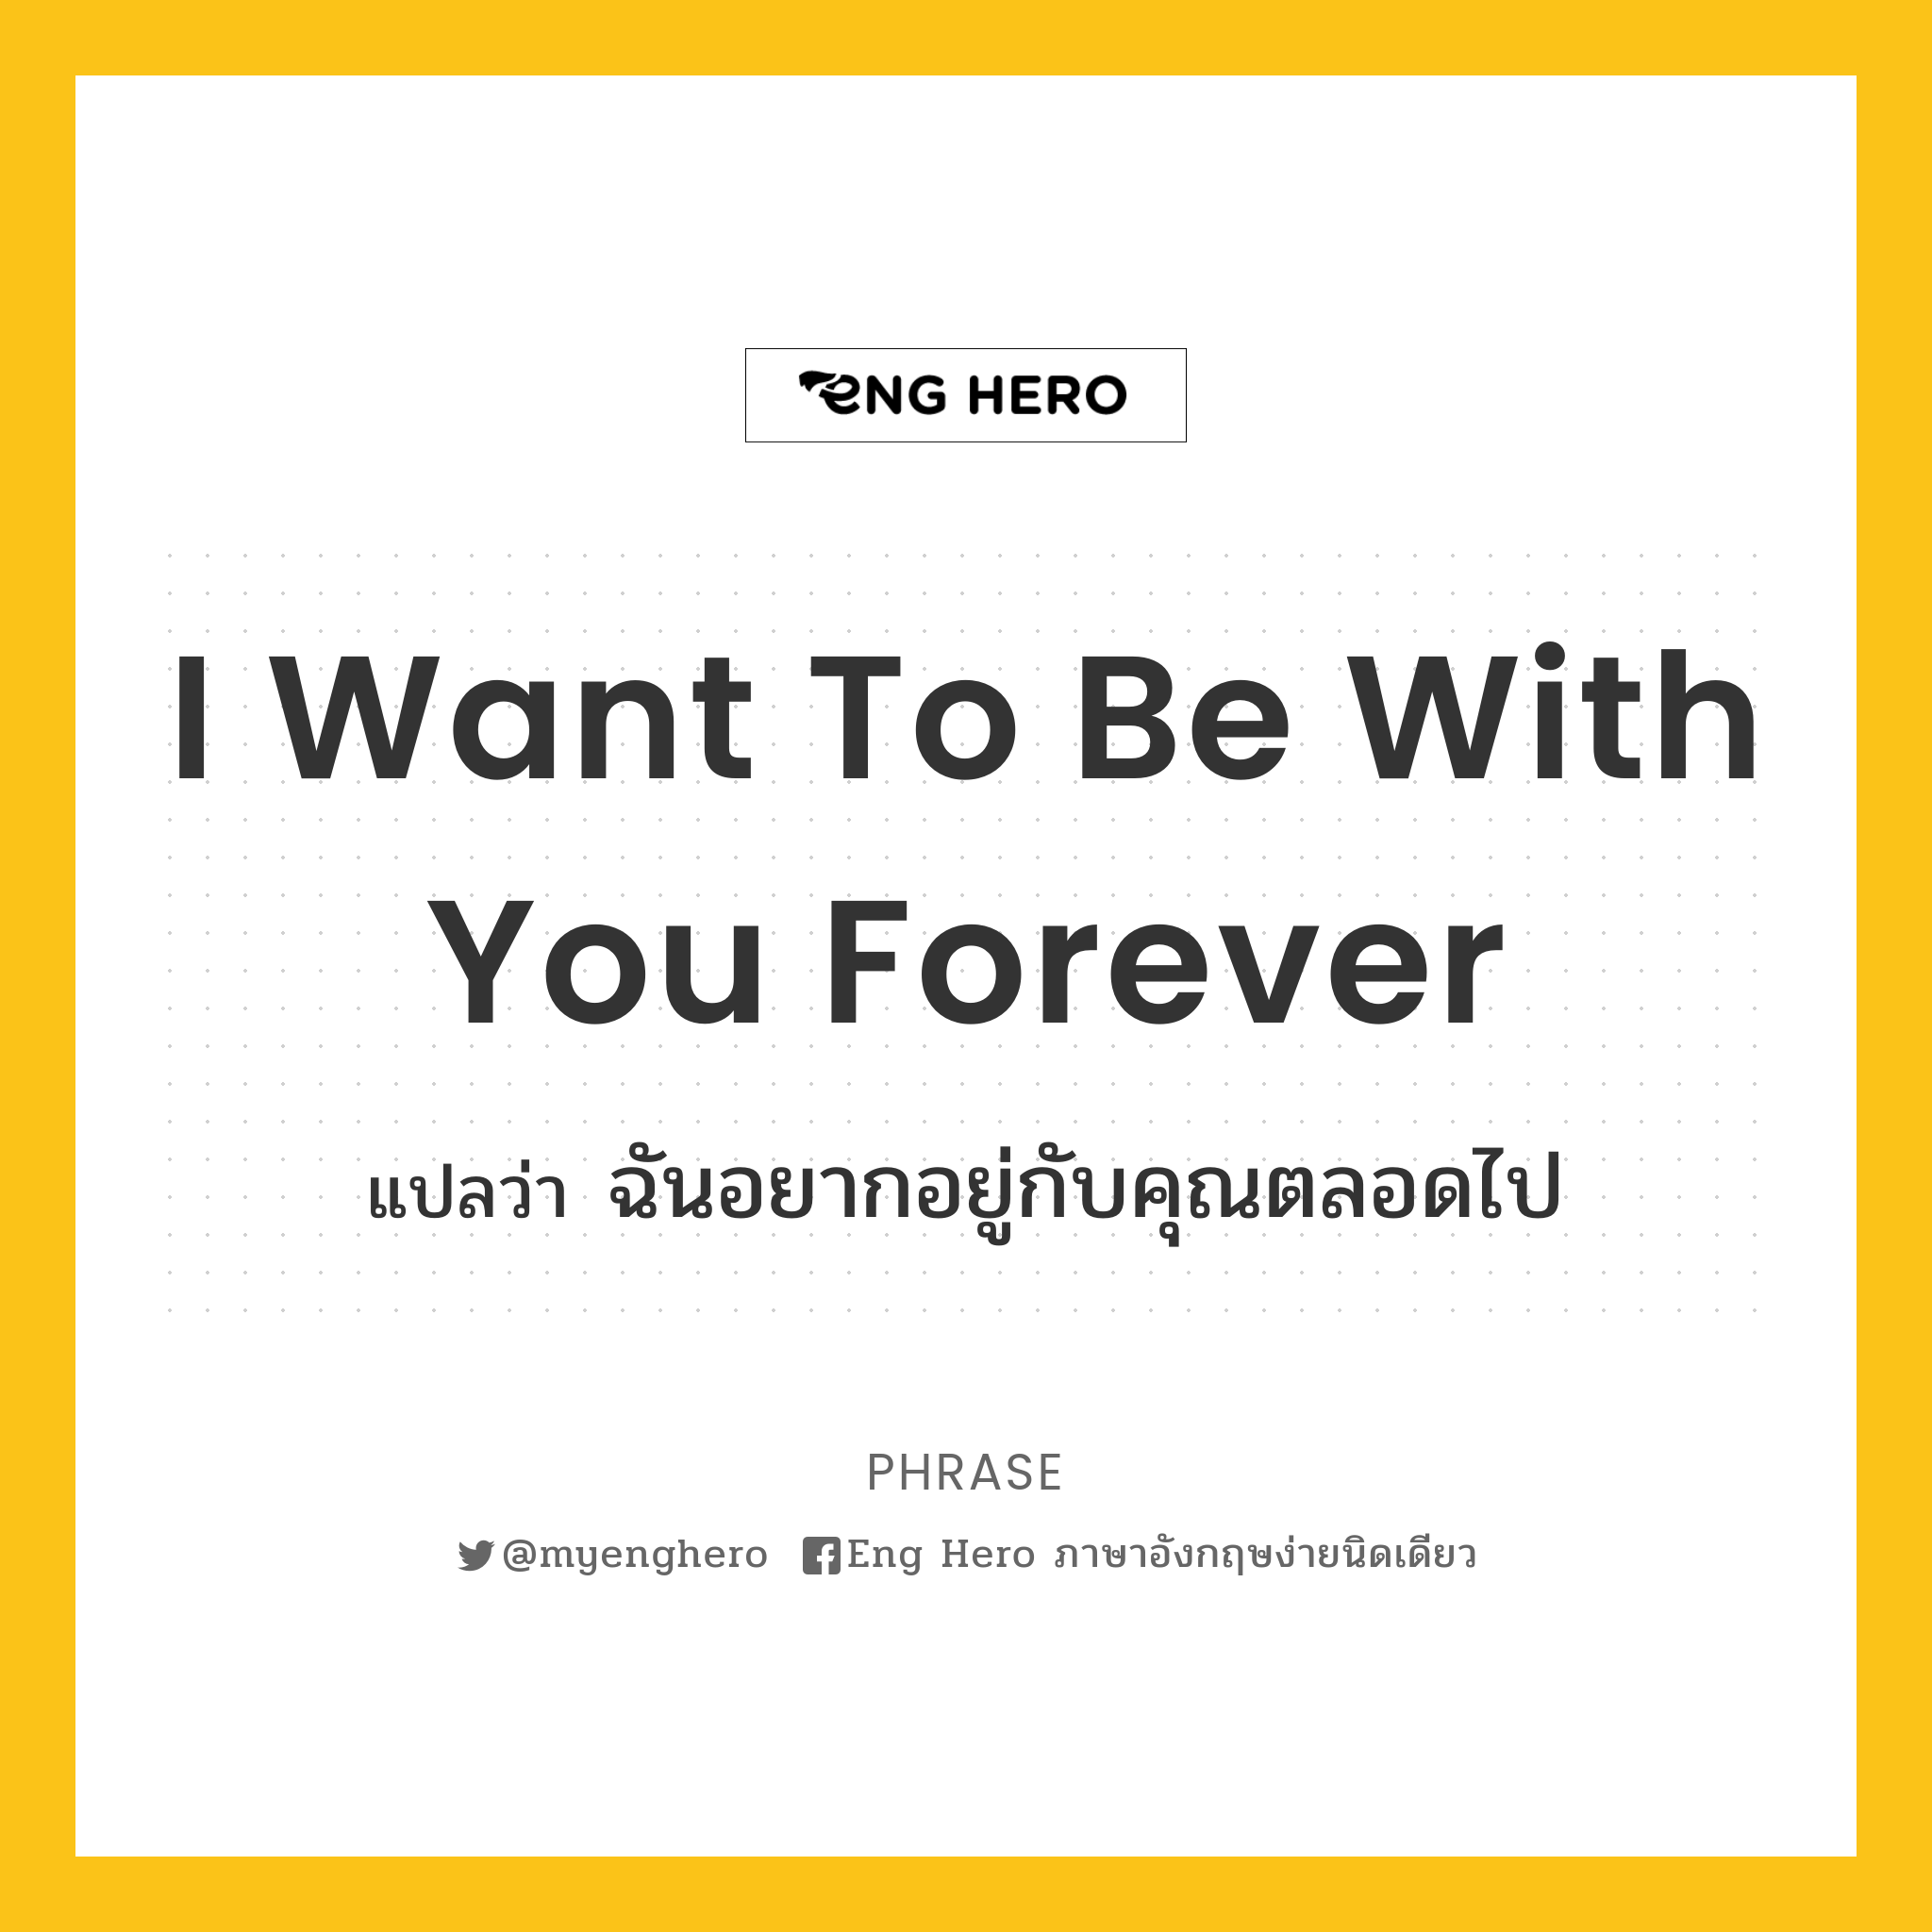 I want to be with you forever